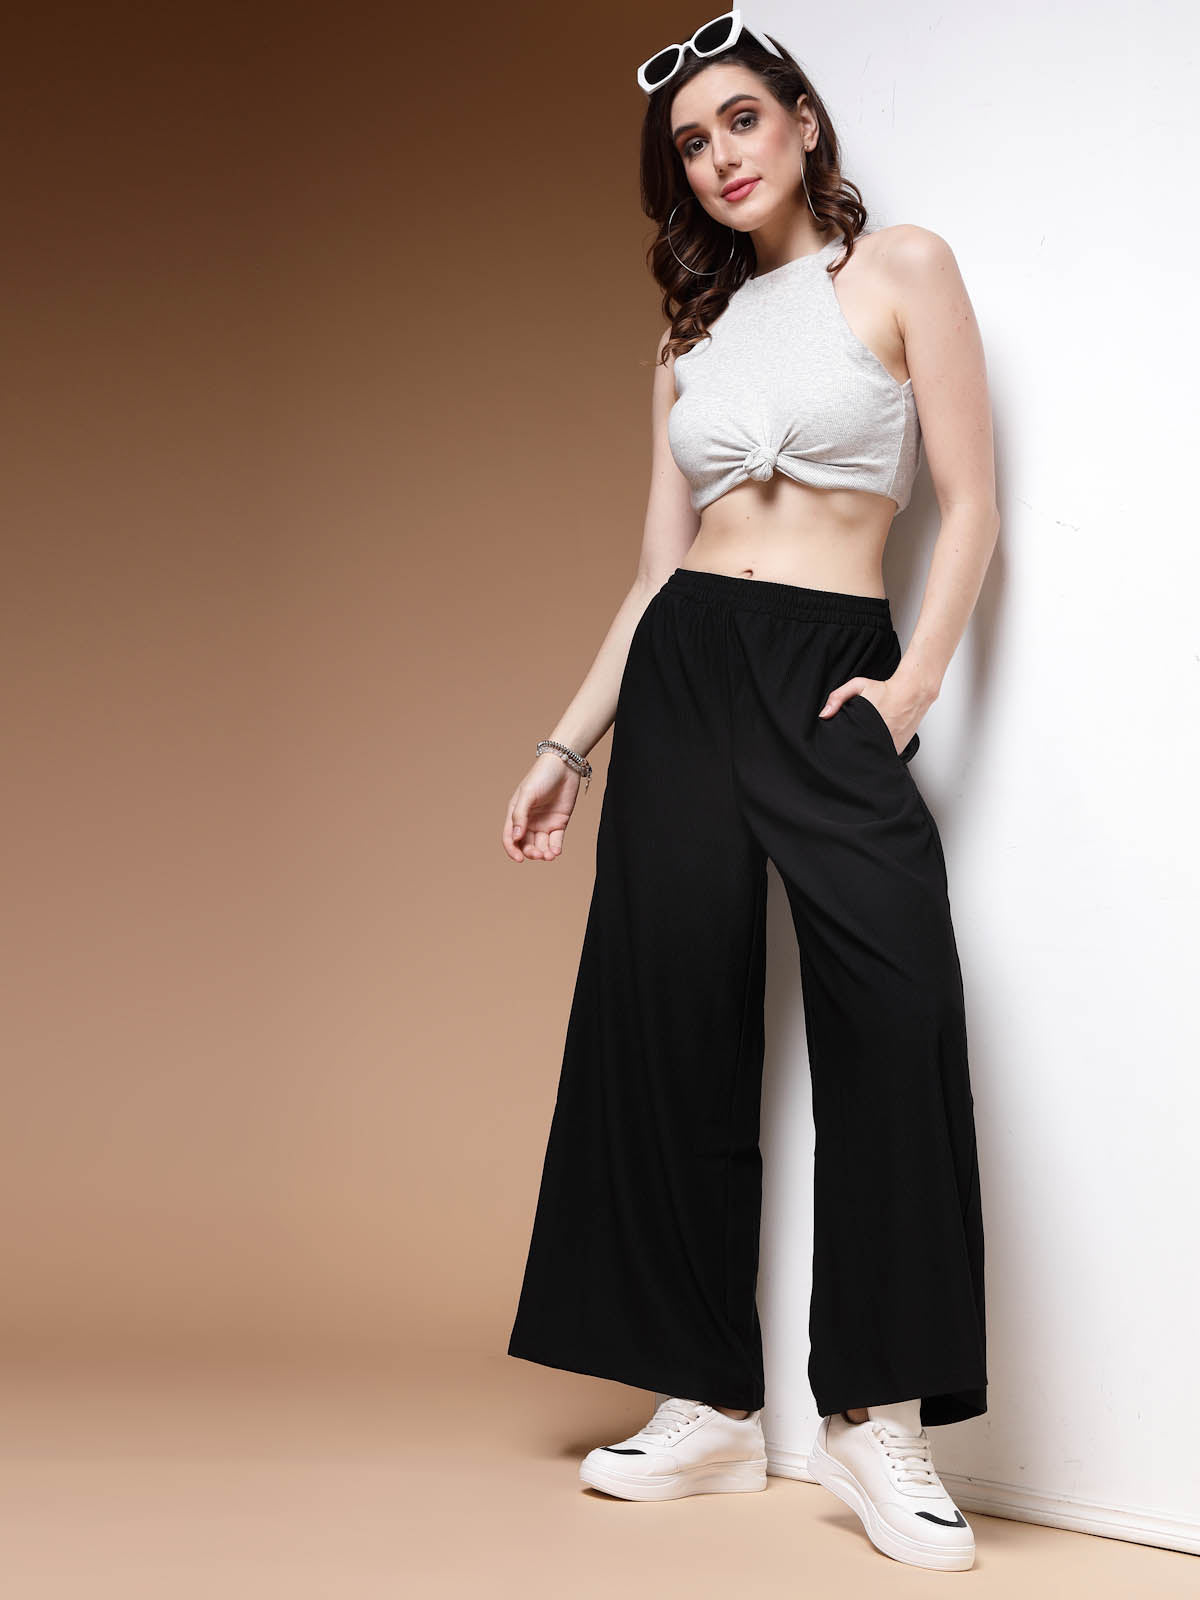 Black Solid Parallel Trousers for Woman by Dress Berry